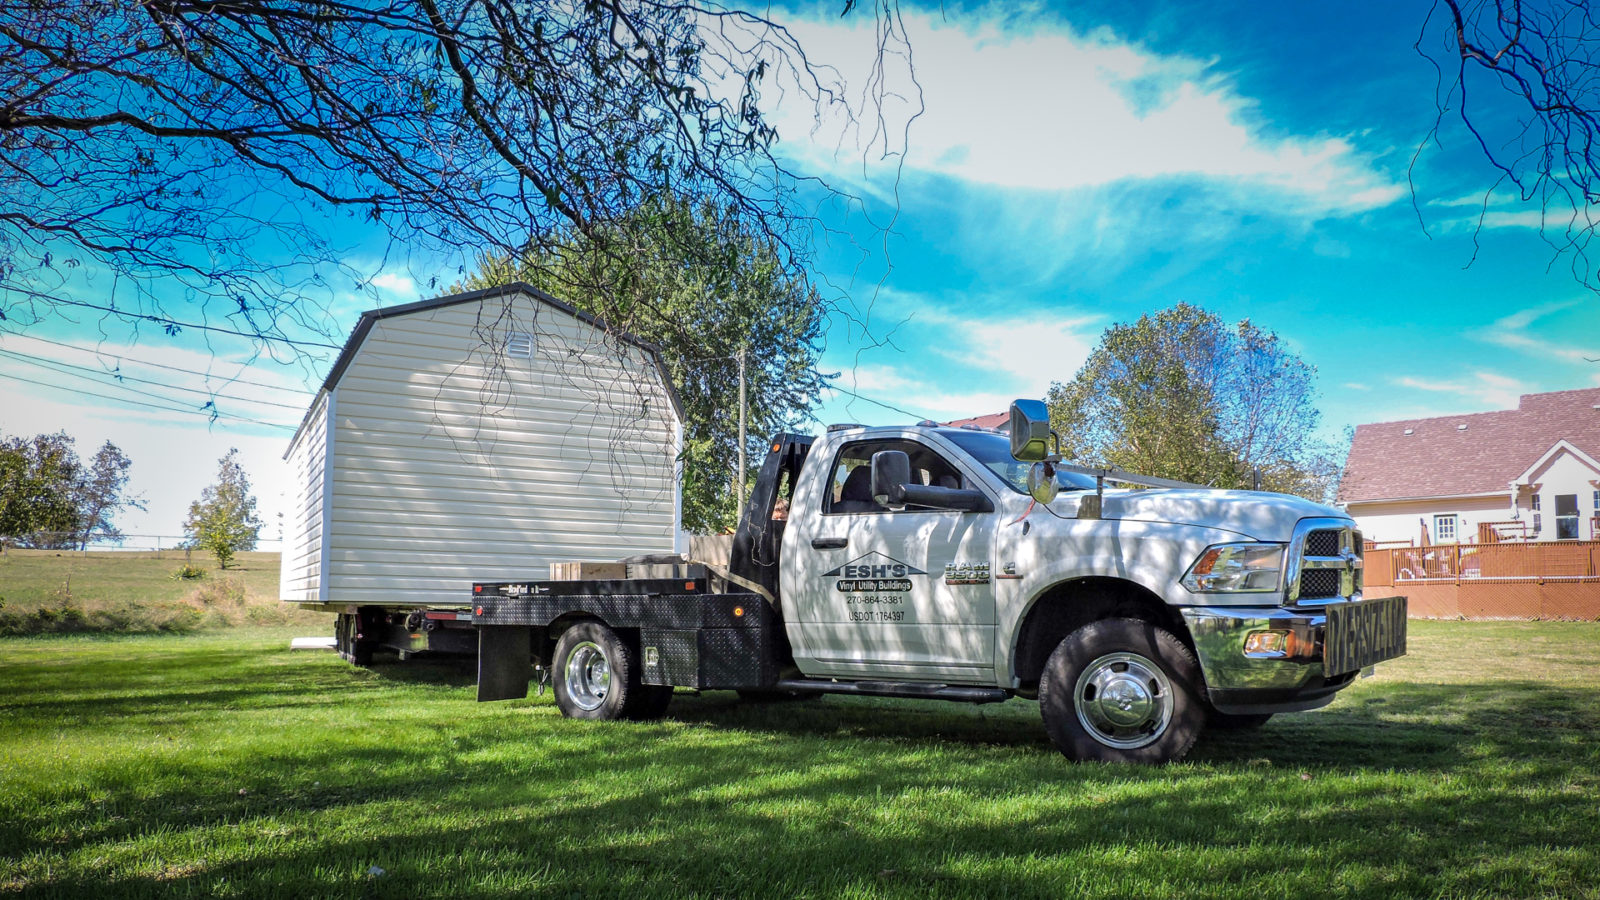 exterior of truck and shed for delivery for modular cabins for sale article